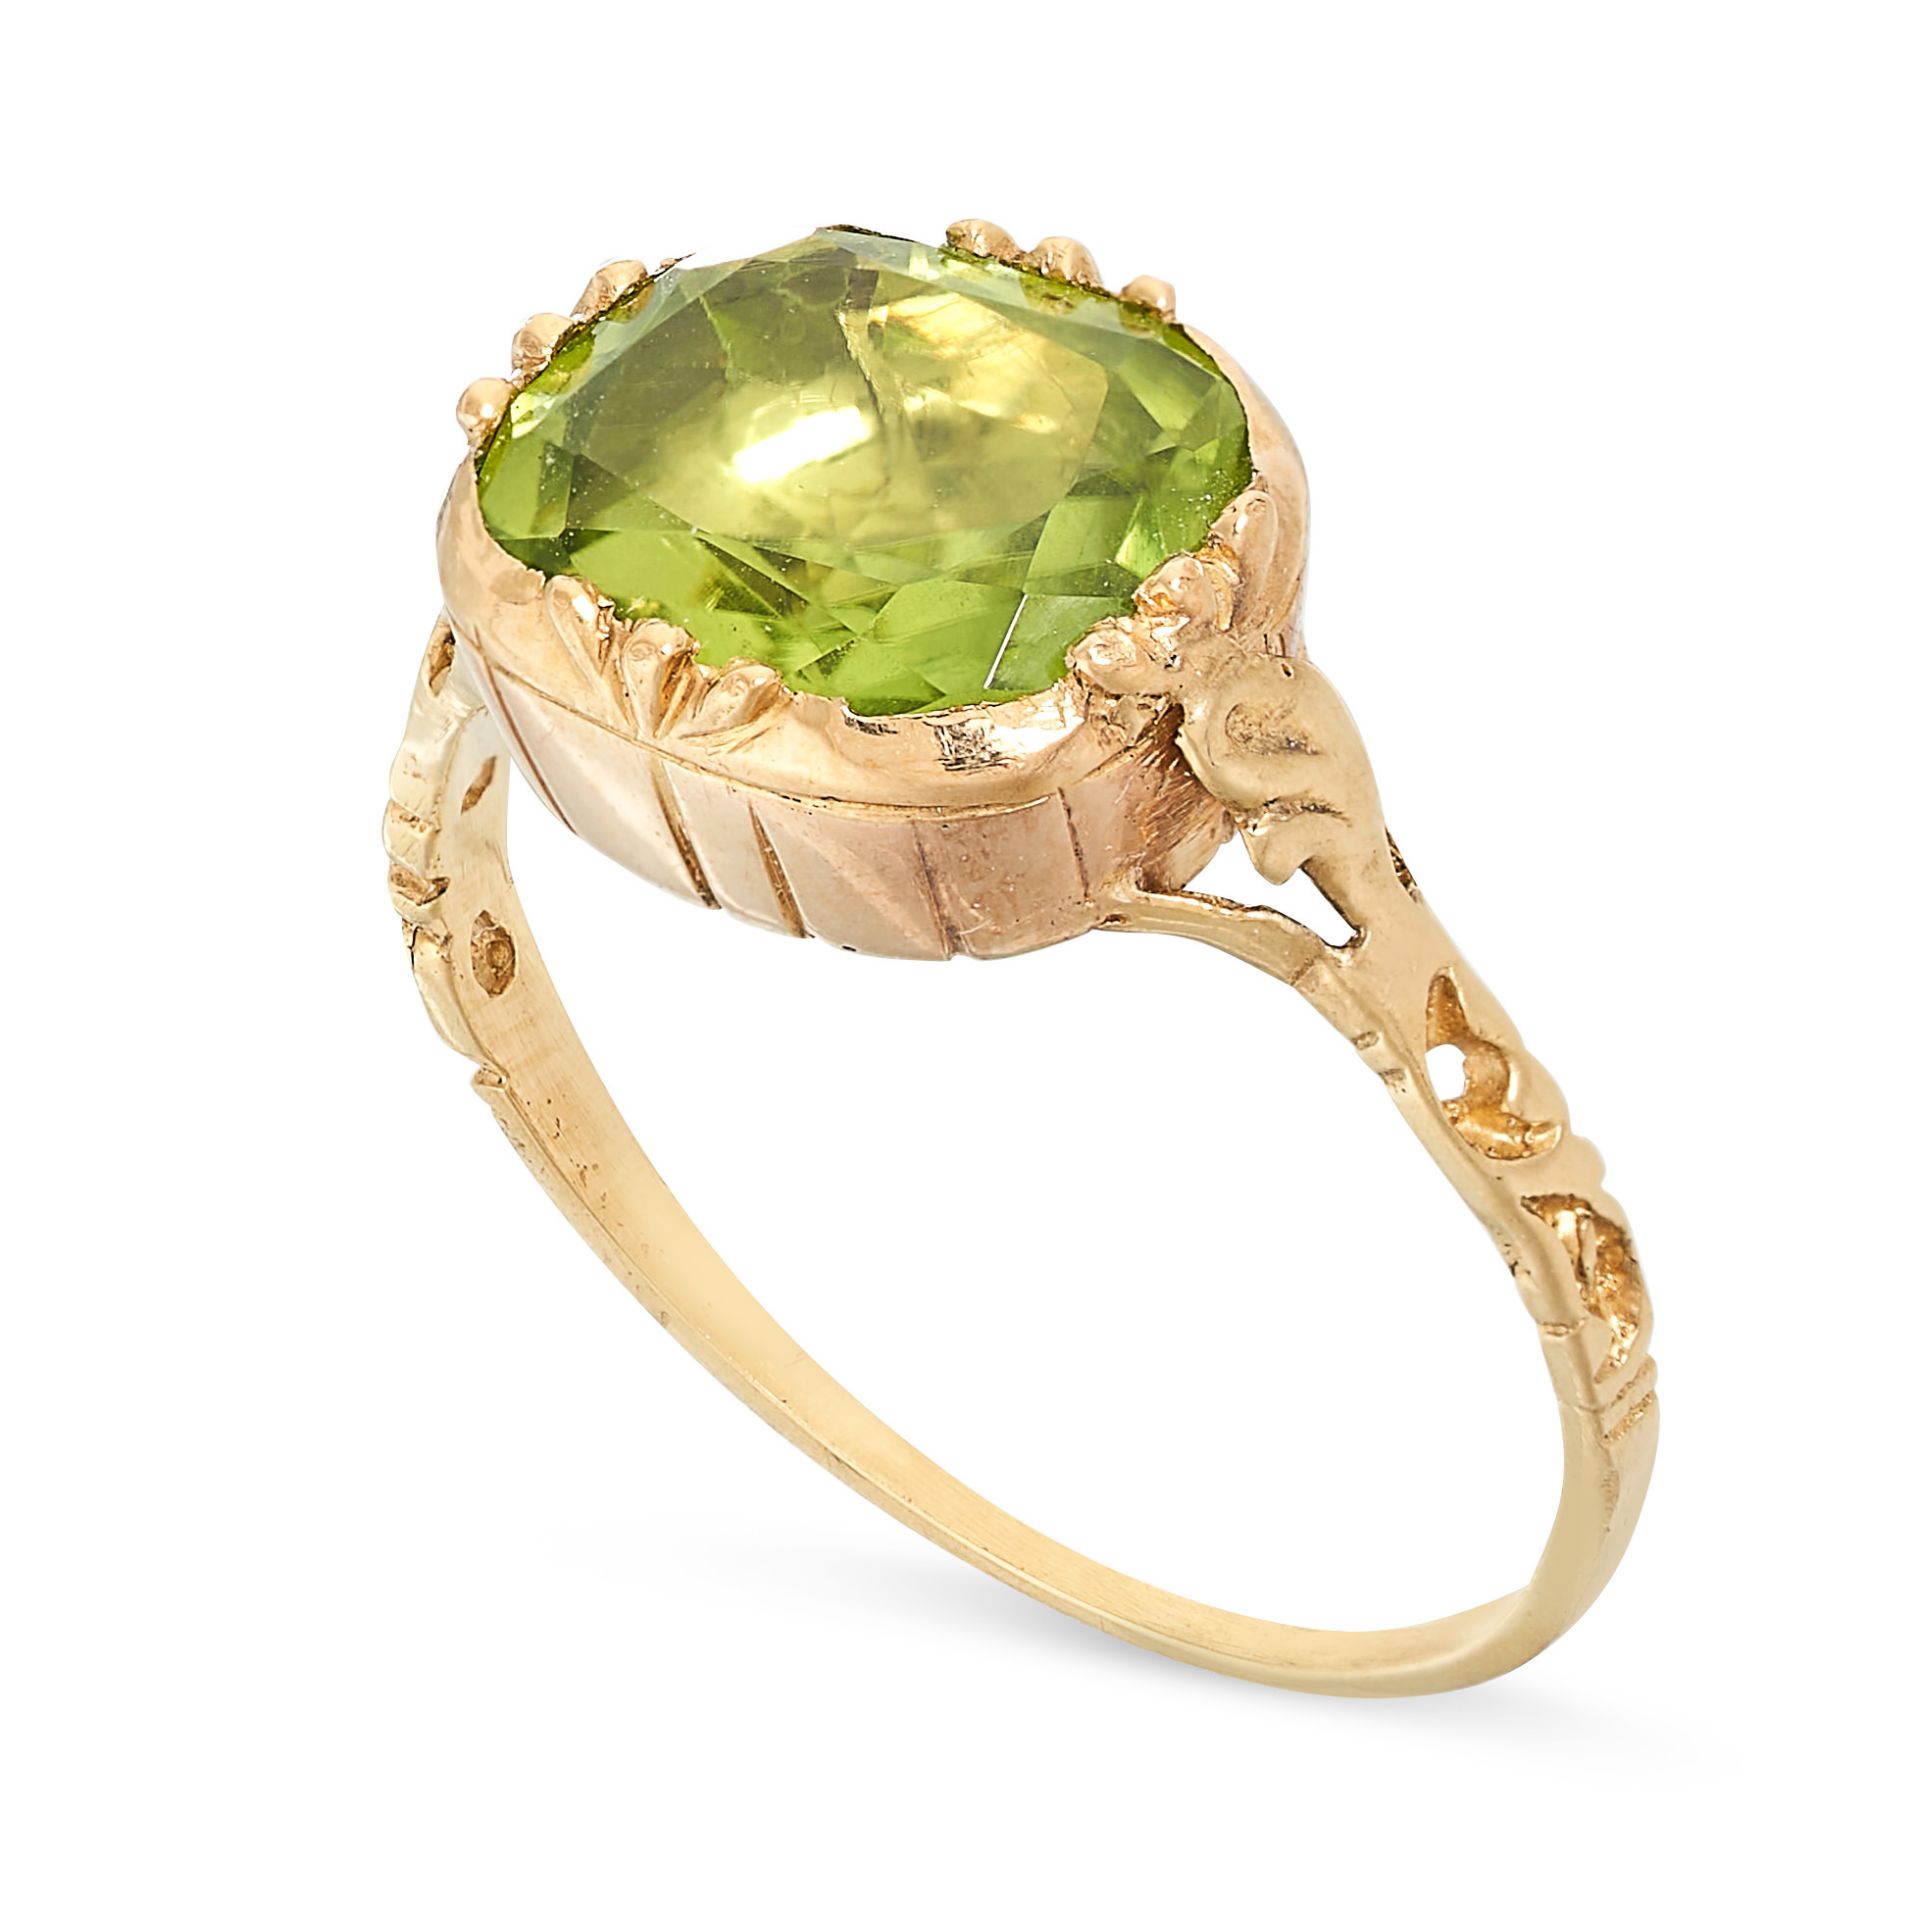 A PERIDOT DRESS RING, 19TH CENTURY AND LATER in yellow gold, later converted to a ring with the - Image 2 of 2